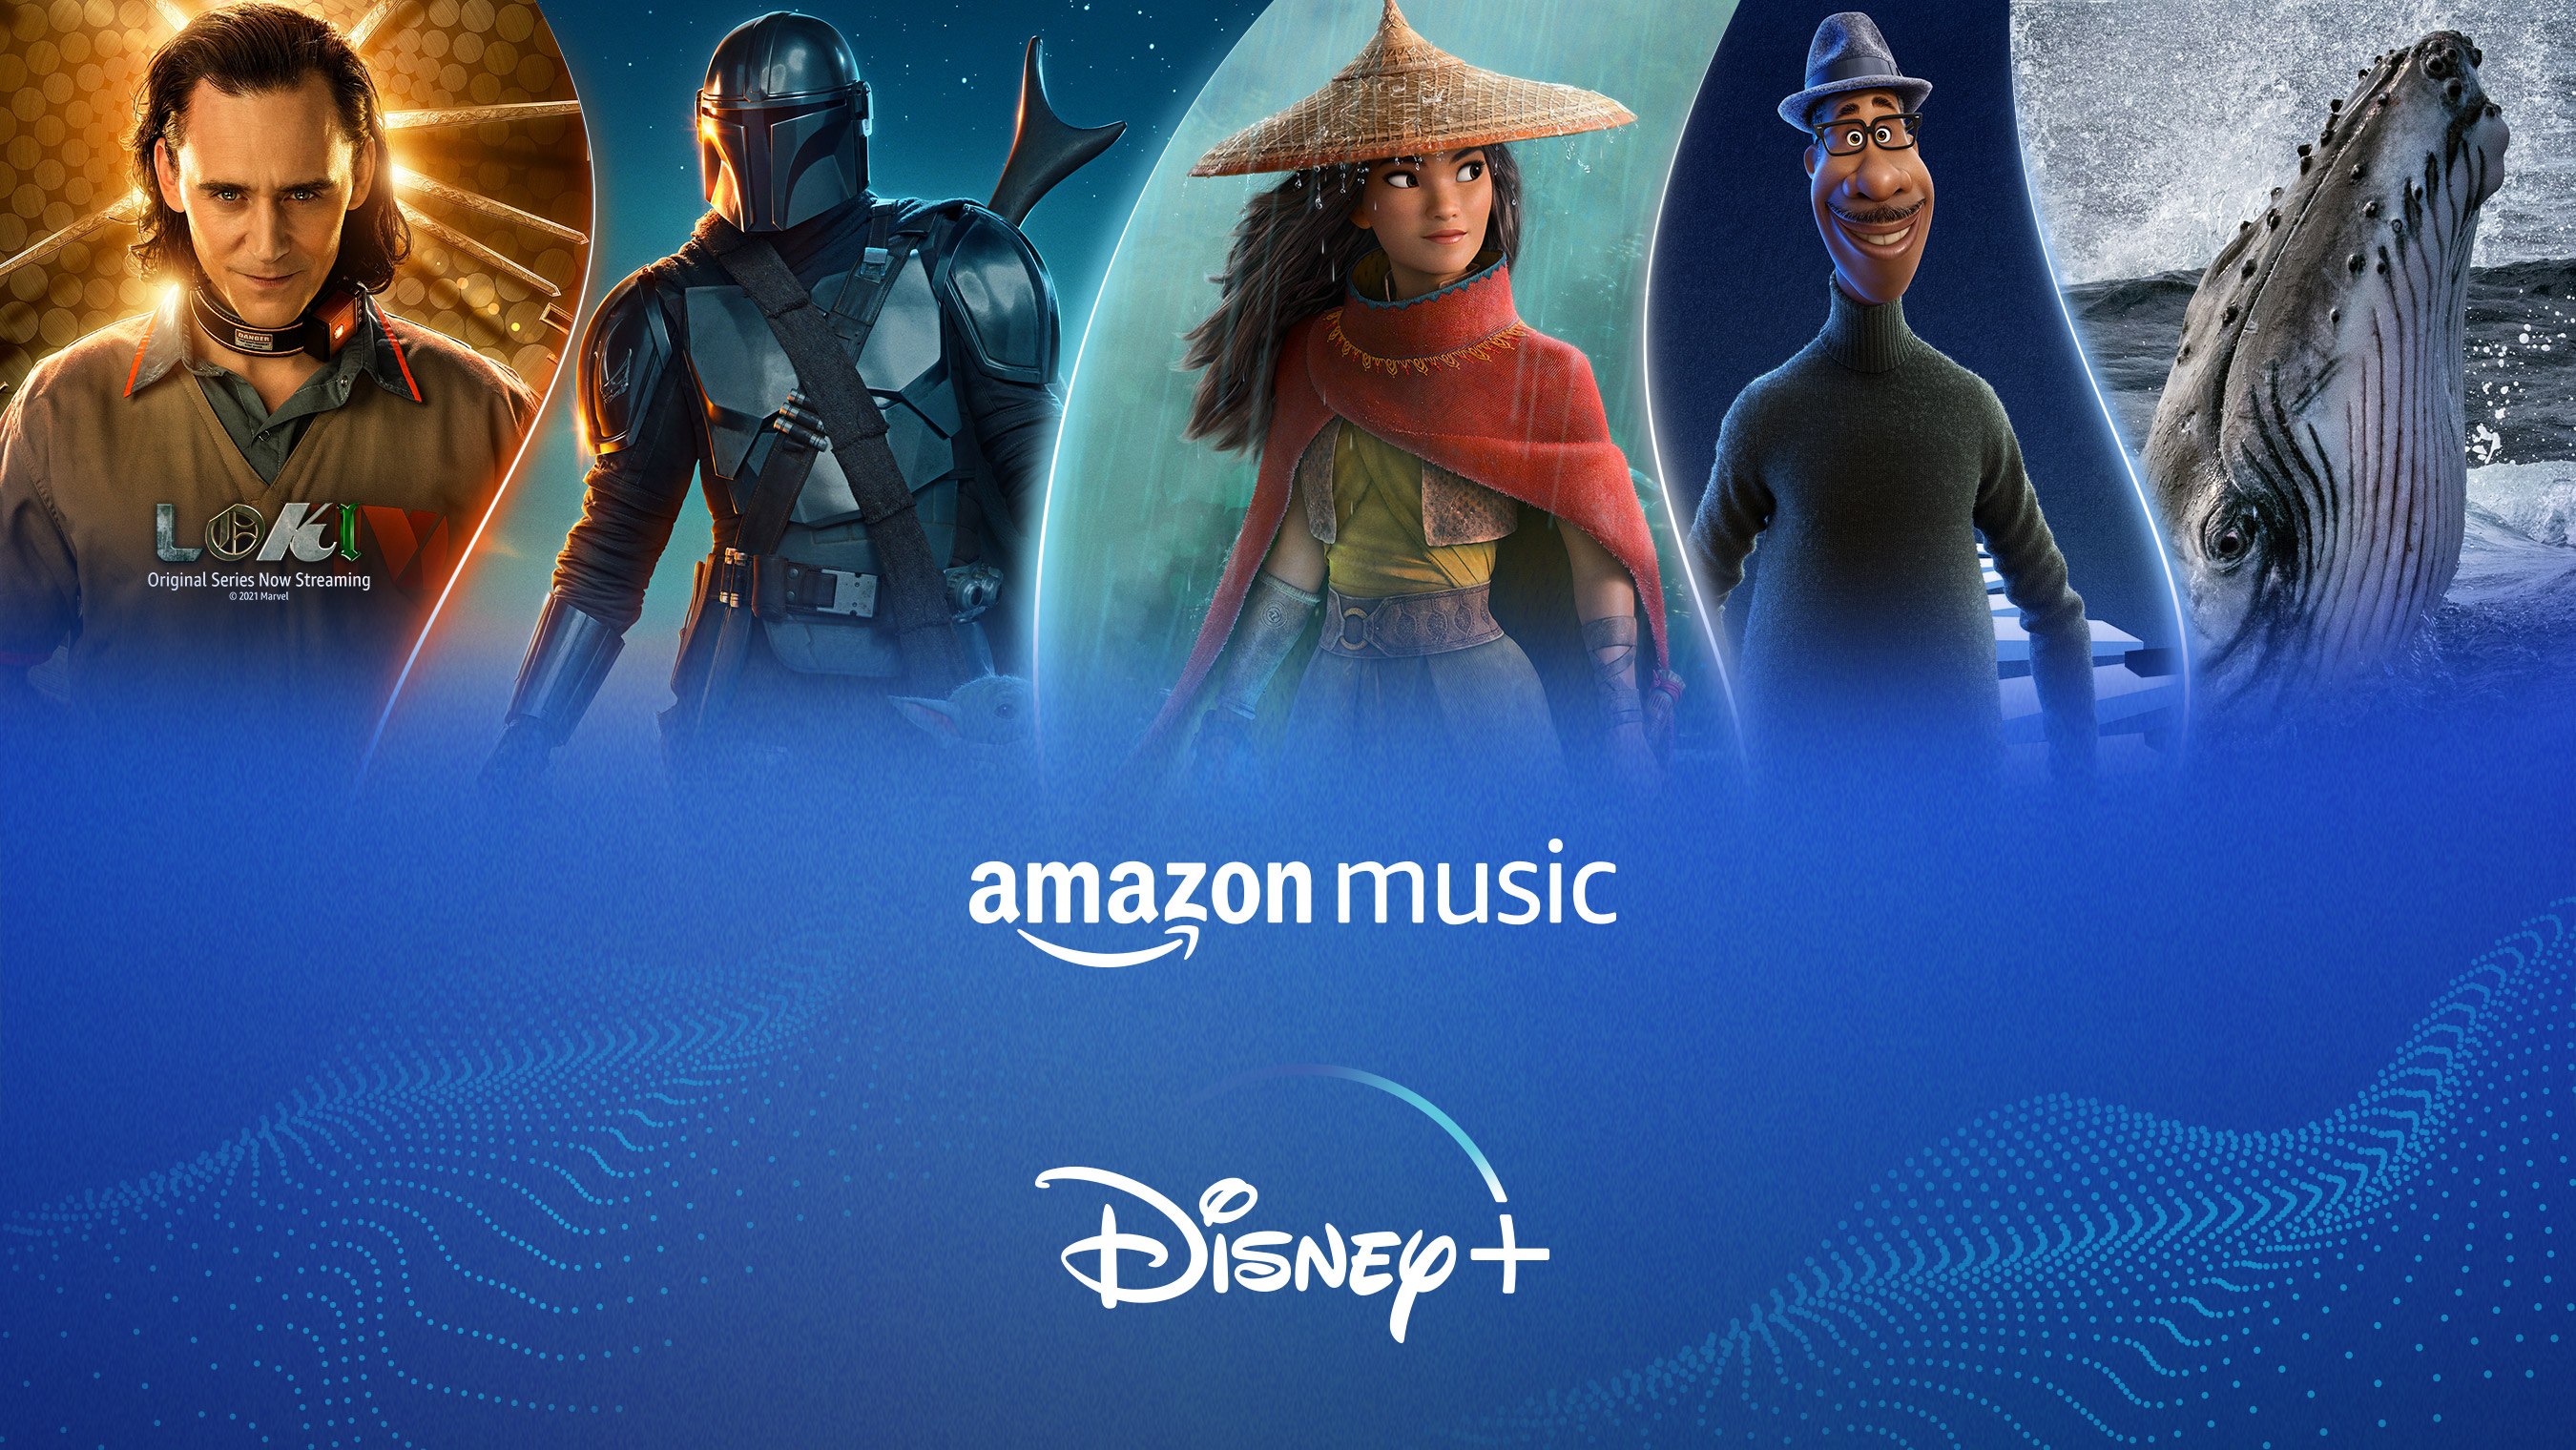 Get 6 Months of Disney+ Free When You Sign Up for Amazon Music Unlimited